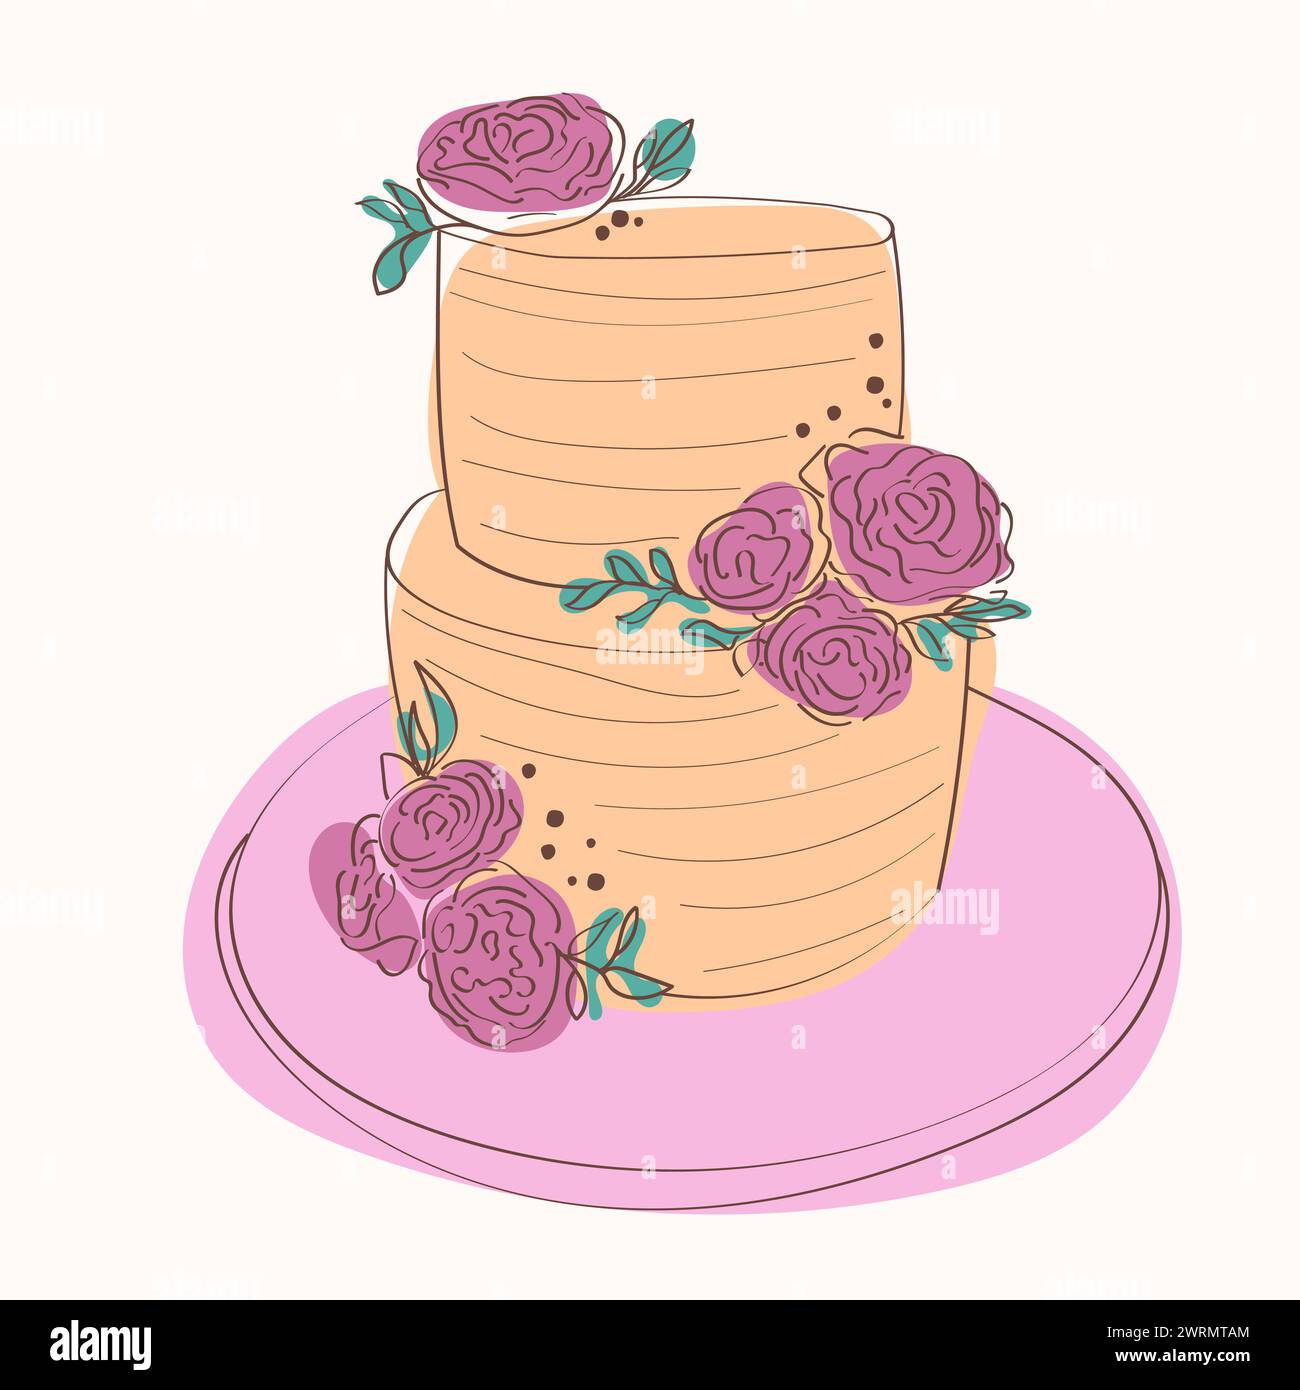 A two-tiered cake decorated with hand-painted flowers on the top layer. The cake appears to be intricately designed and visually appealing Stock Vector